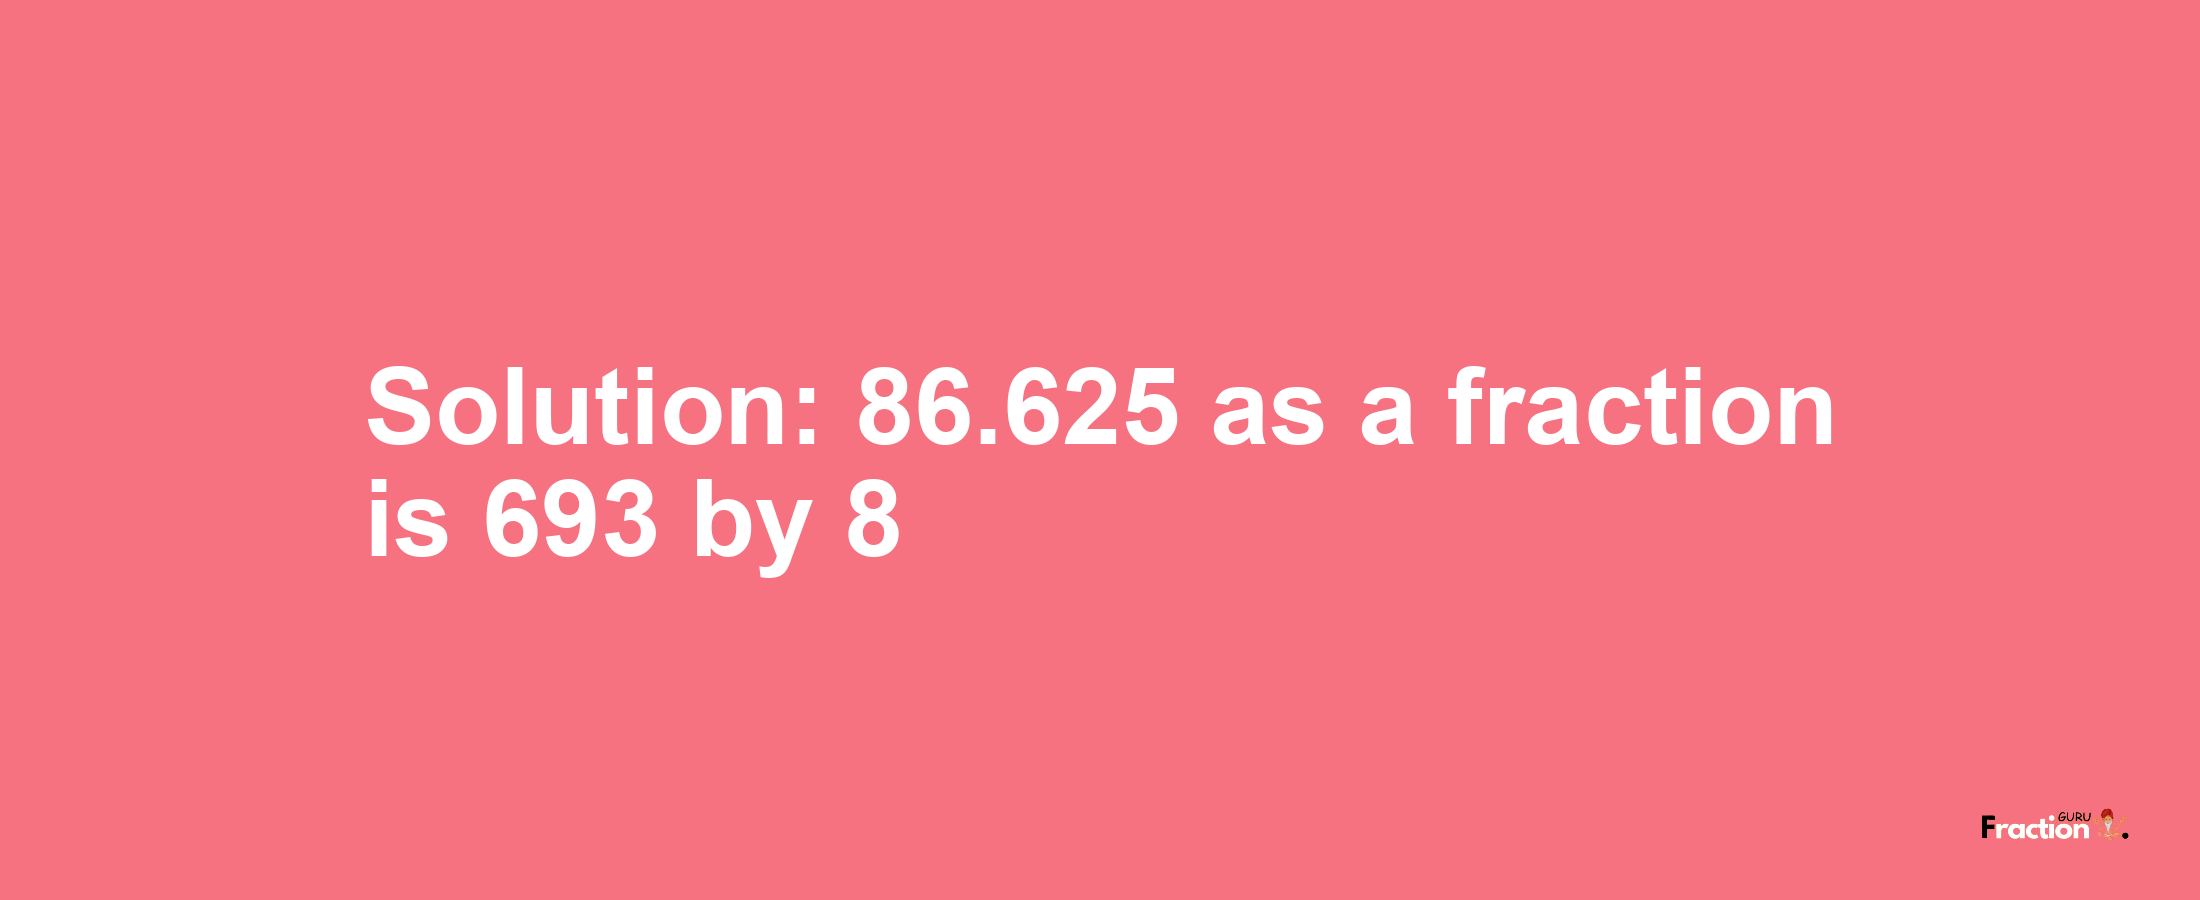 Solution:86.625 as a fraction is 693/8